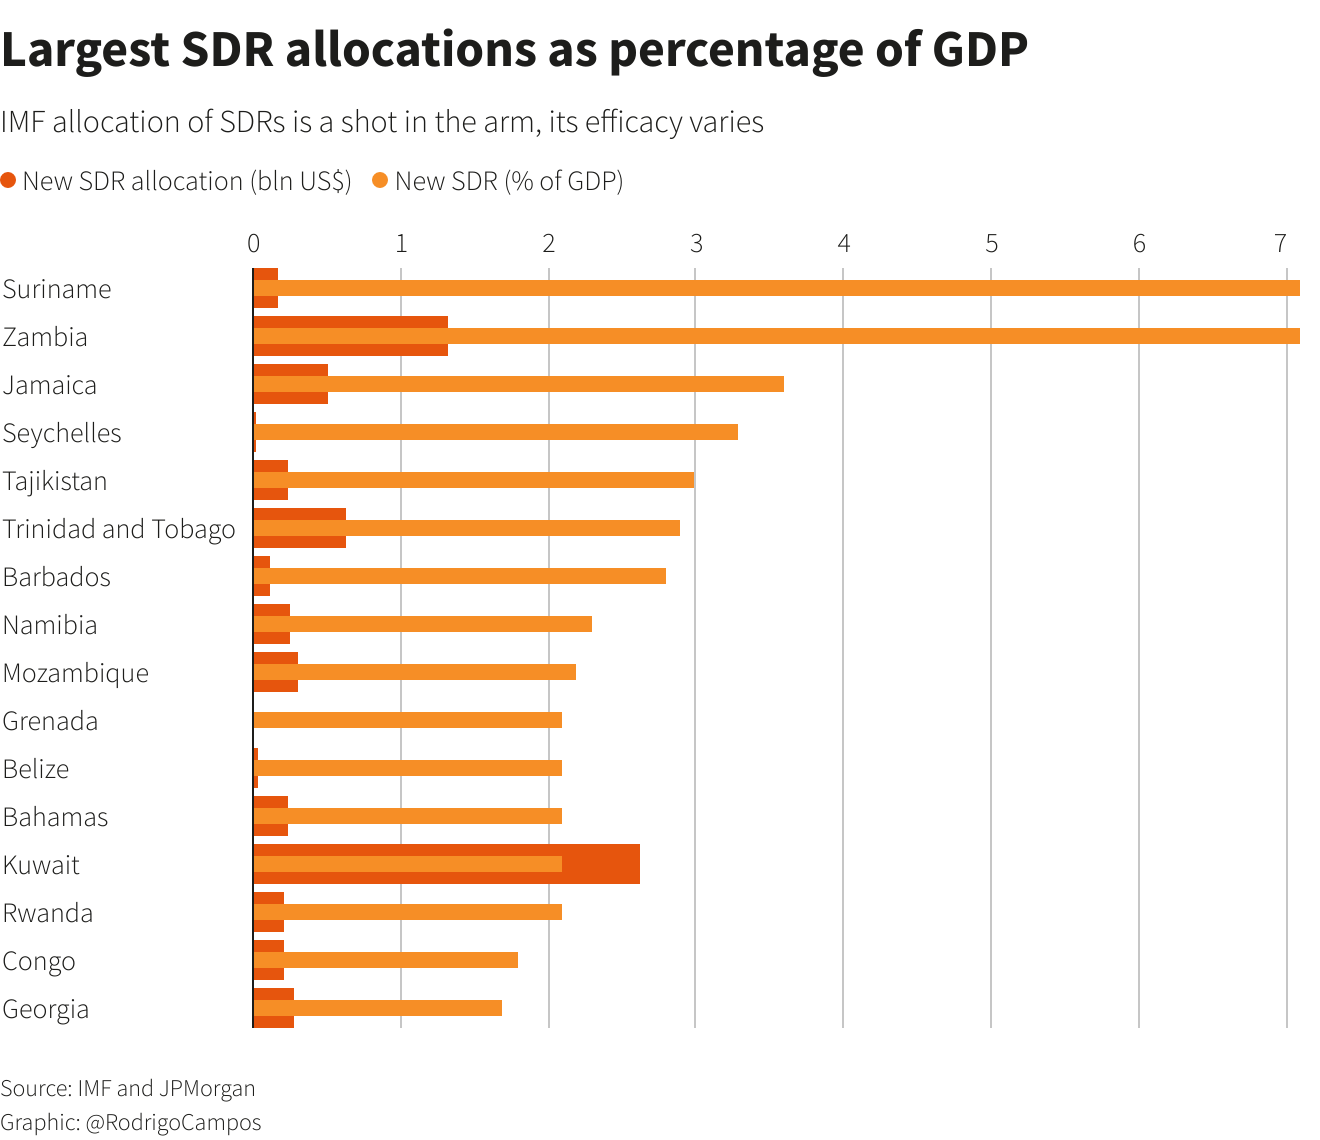 Largest SDR allocations as percentage of GDP